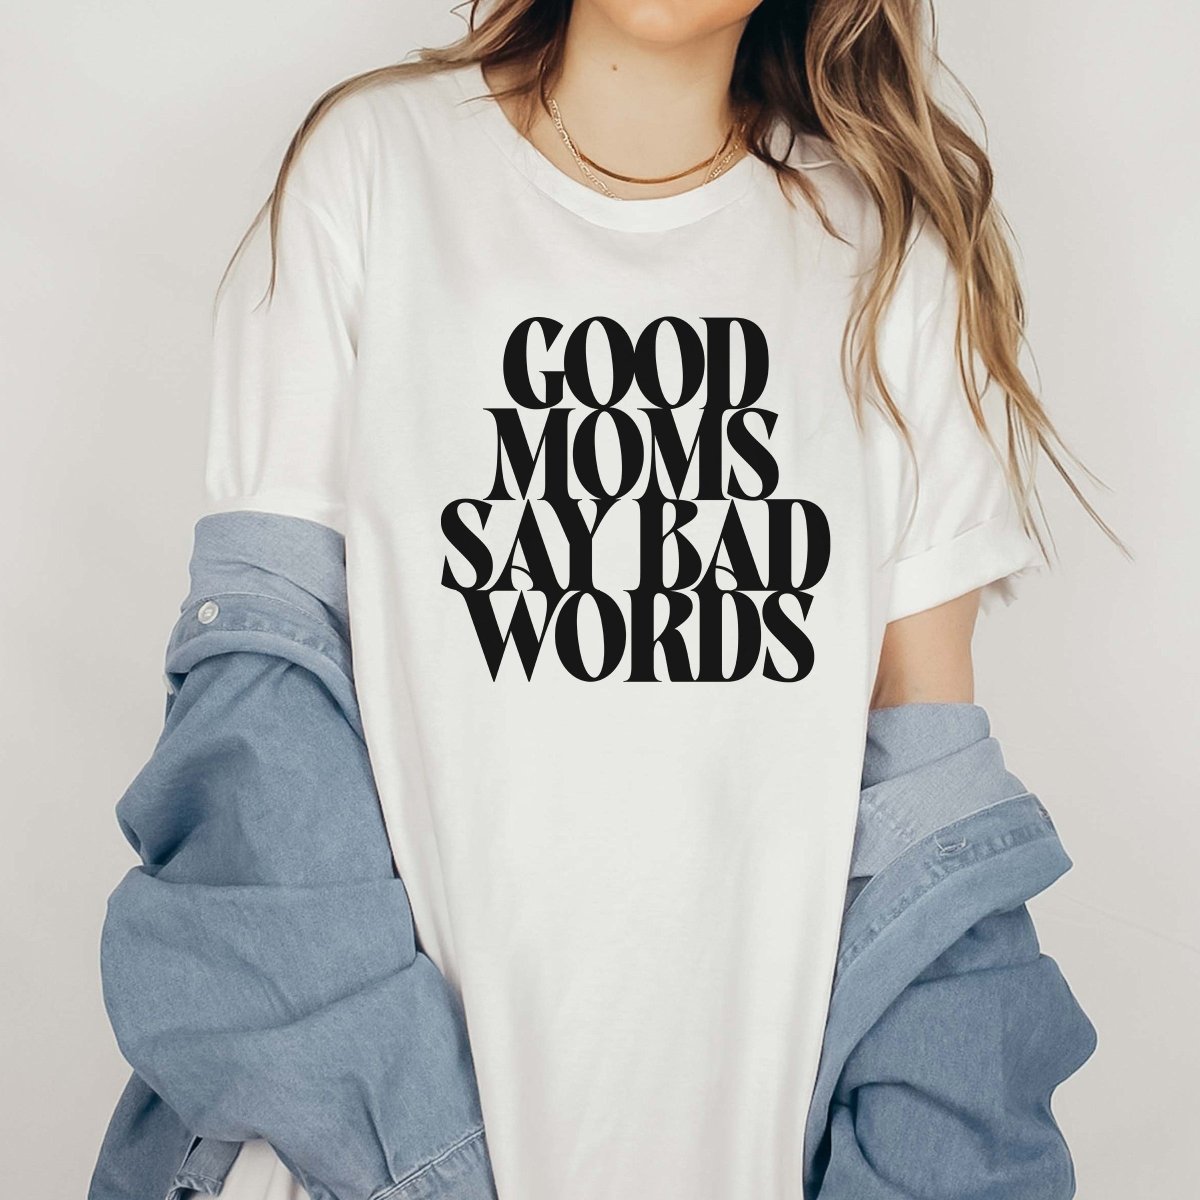 Good moms say bad words Tee - Limeberry Designs